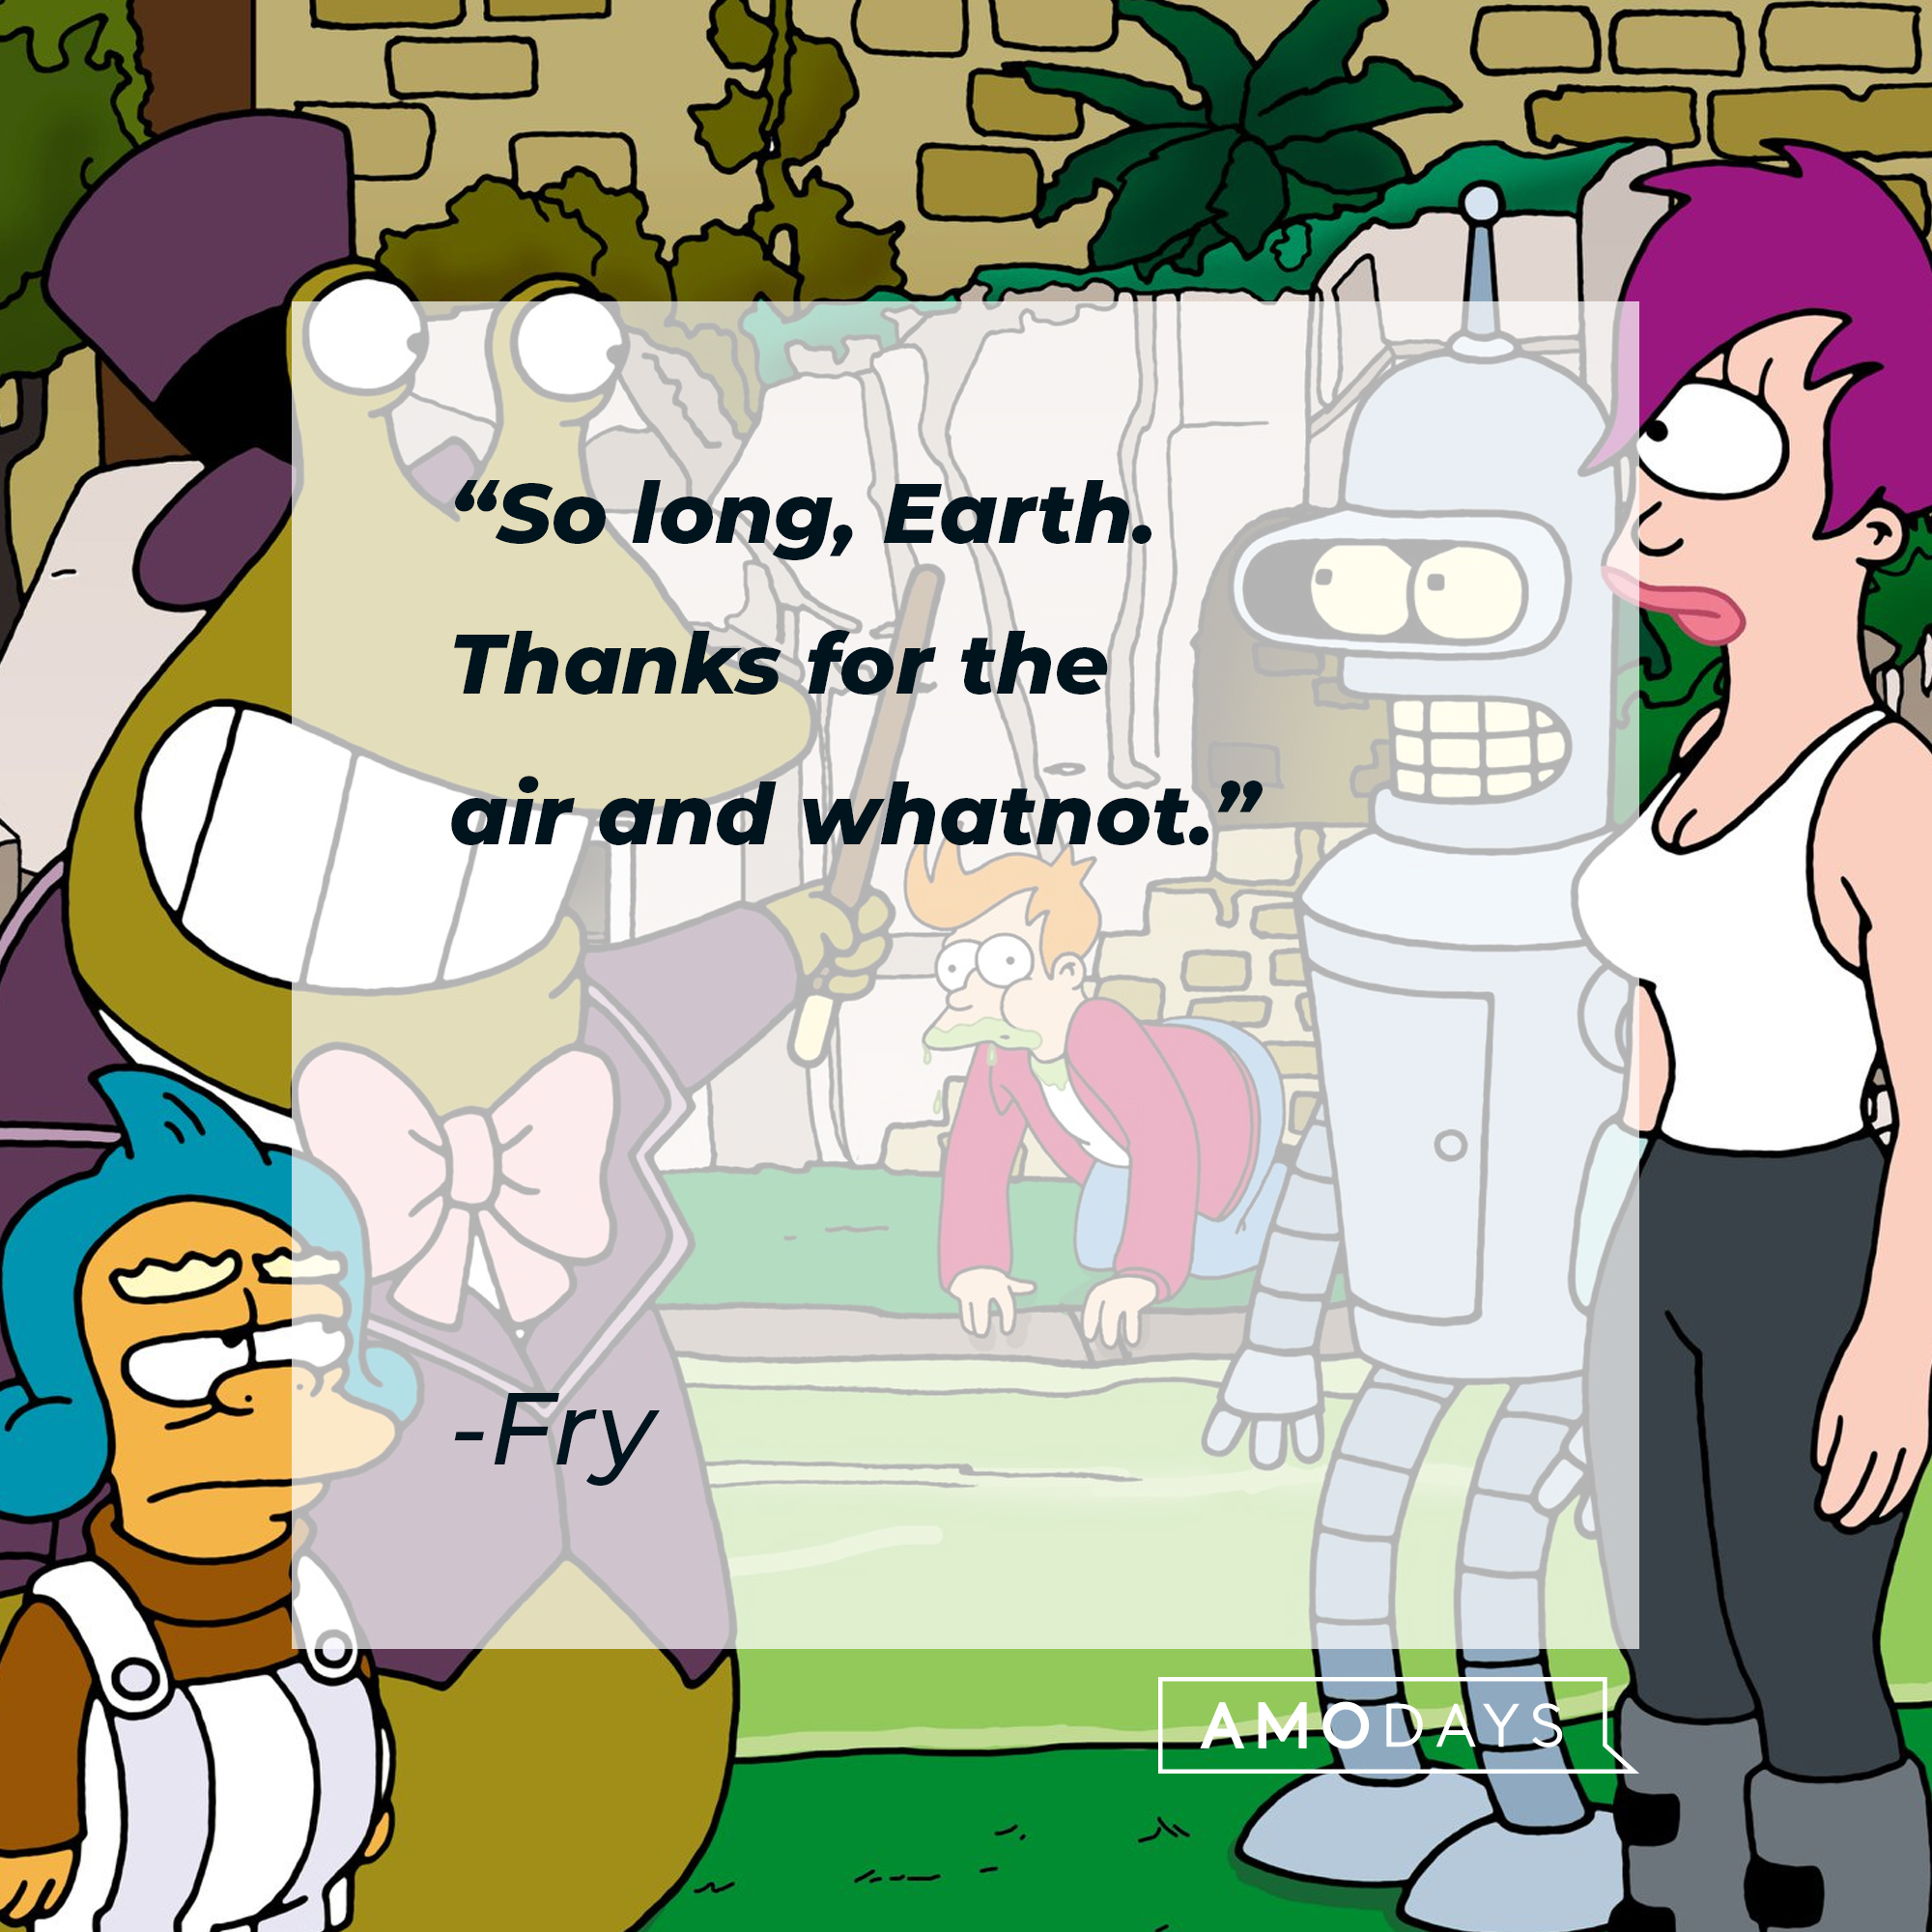 Fry Futurama's quote: "So long, Earth. Thanks for the air and whatnot." | Source: Facebook.com/Futurama